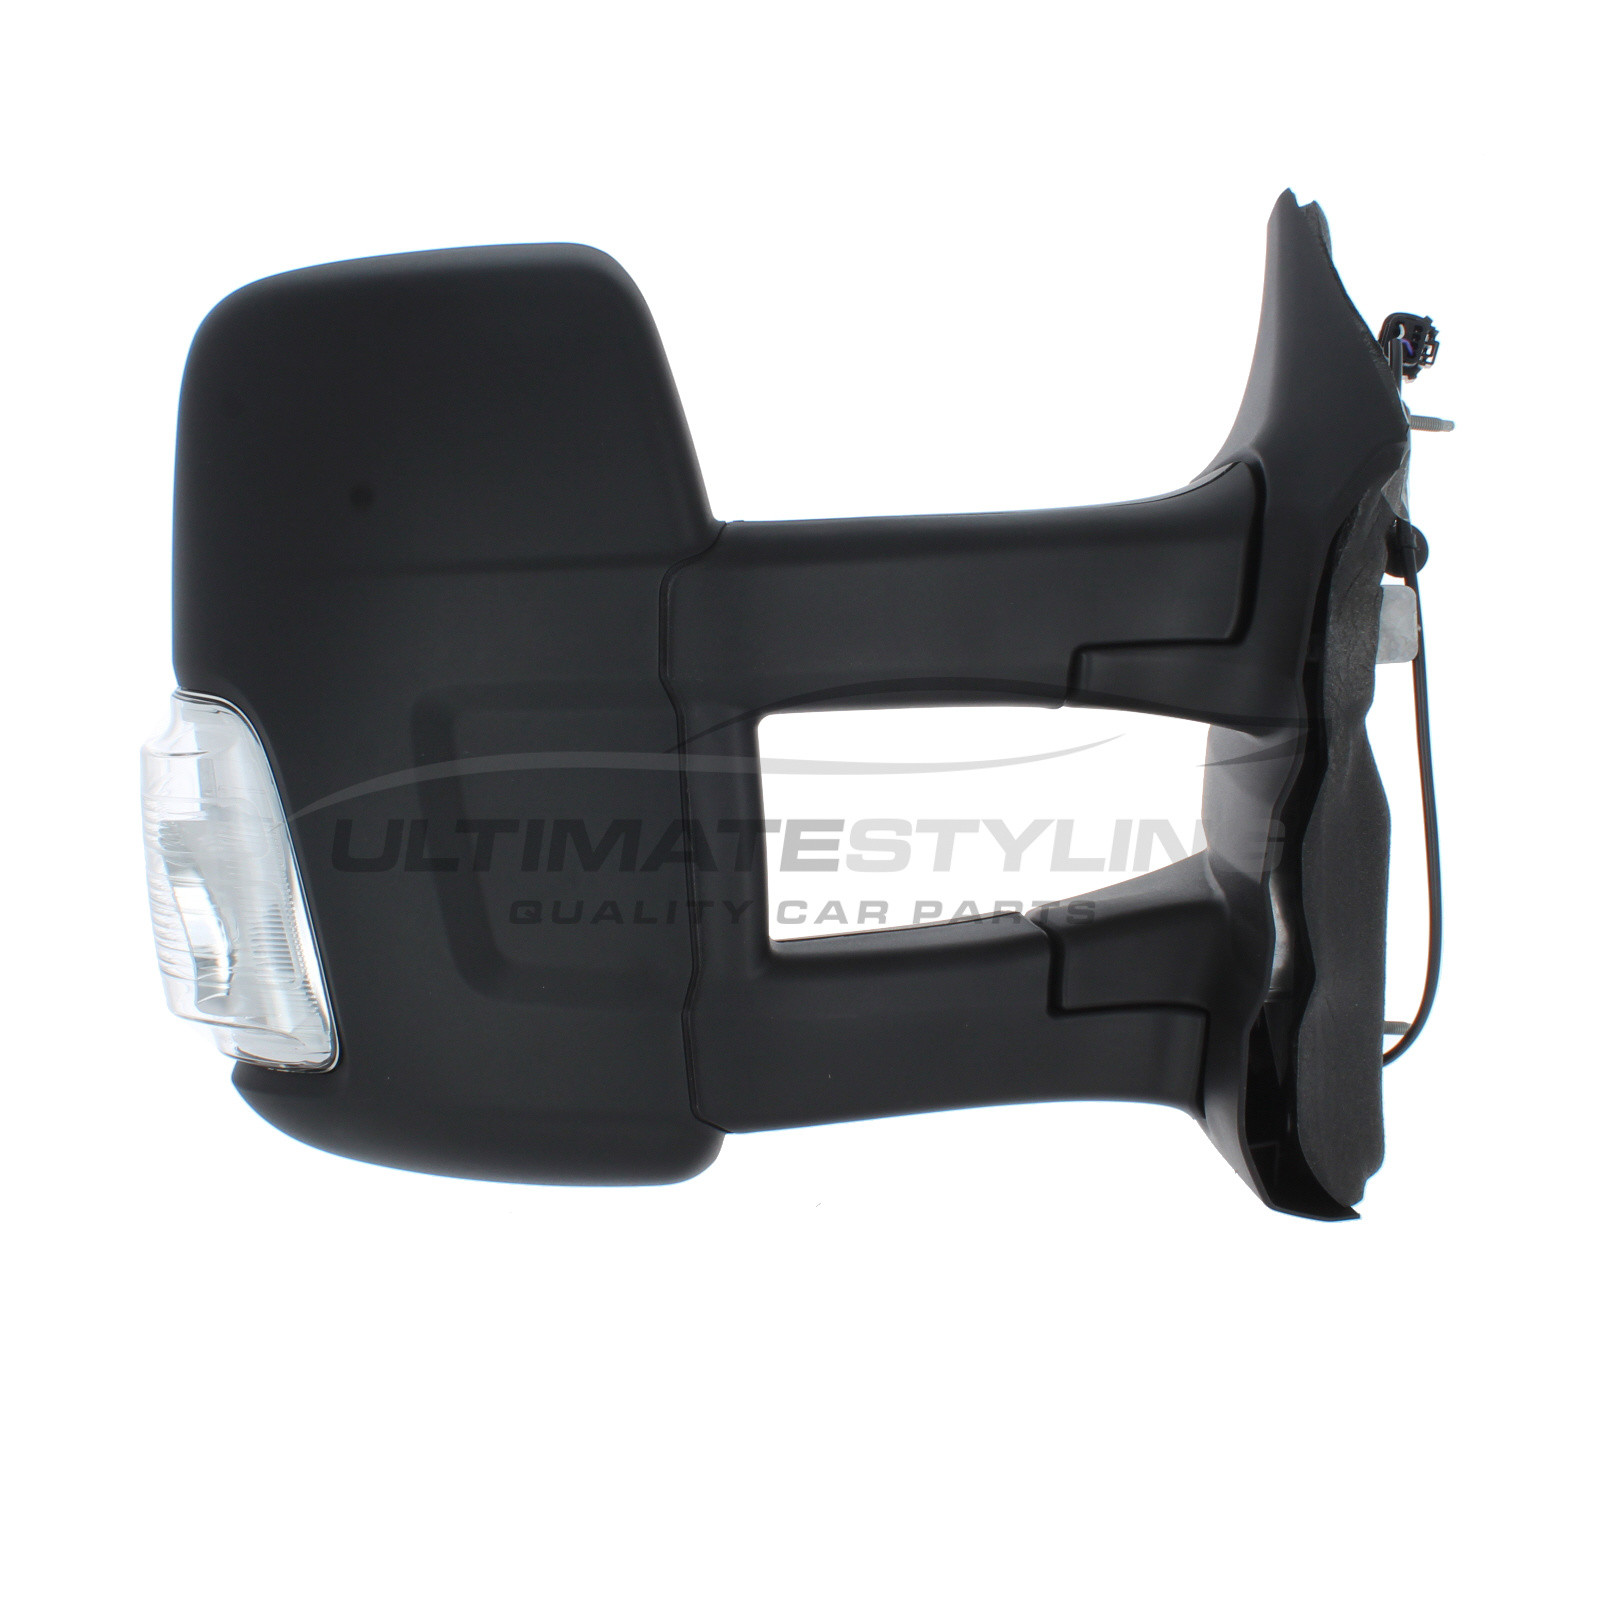 Ford Transit Wing Mirror / Door Mirror - Drivers Side (RH) - Manual adjustment - Non-Heated Glass - Indicator - Black - Textured